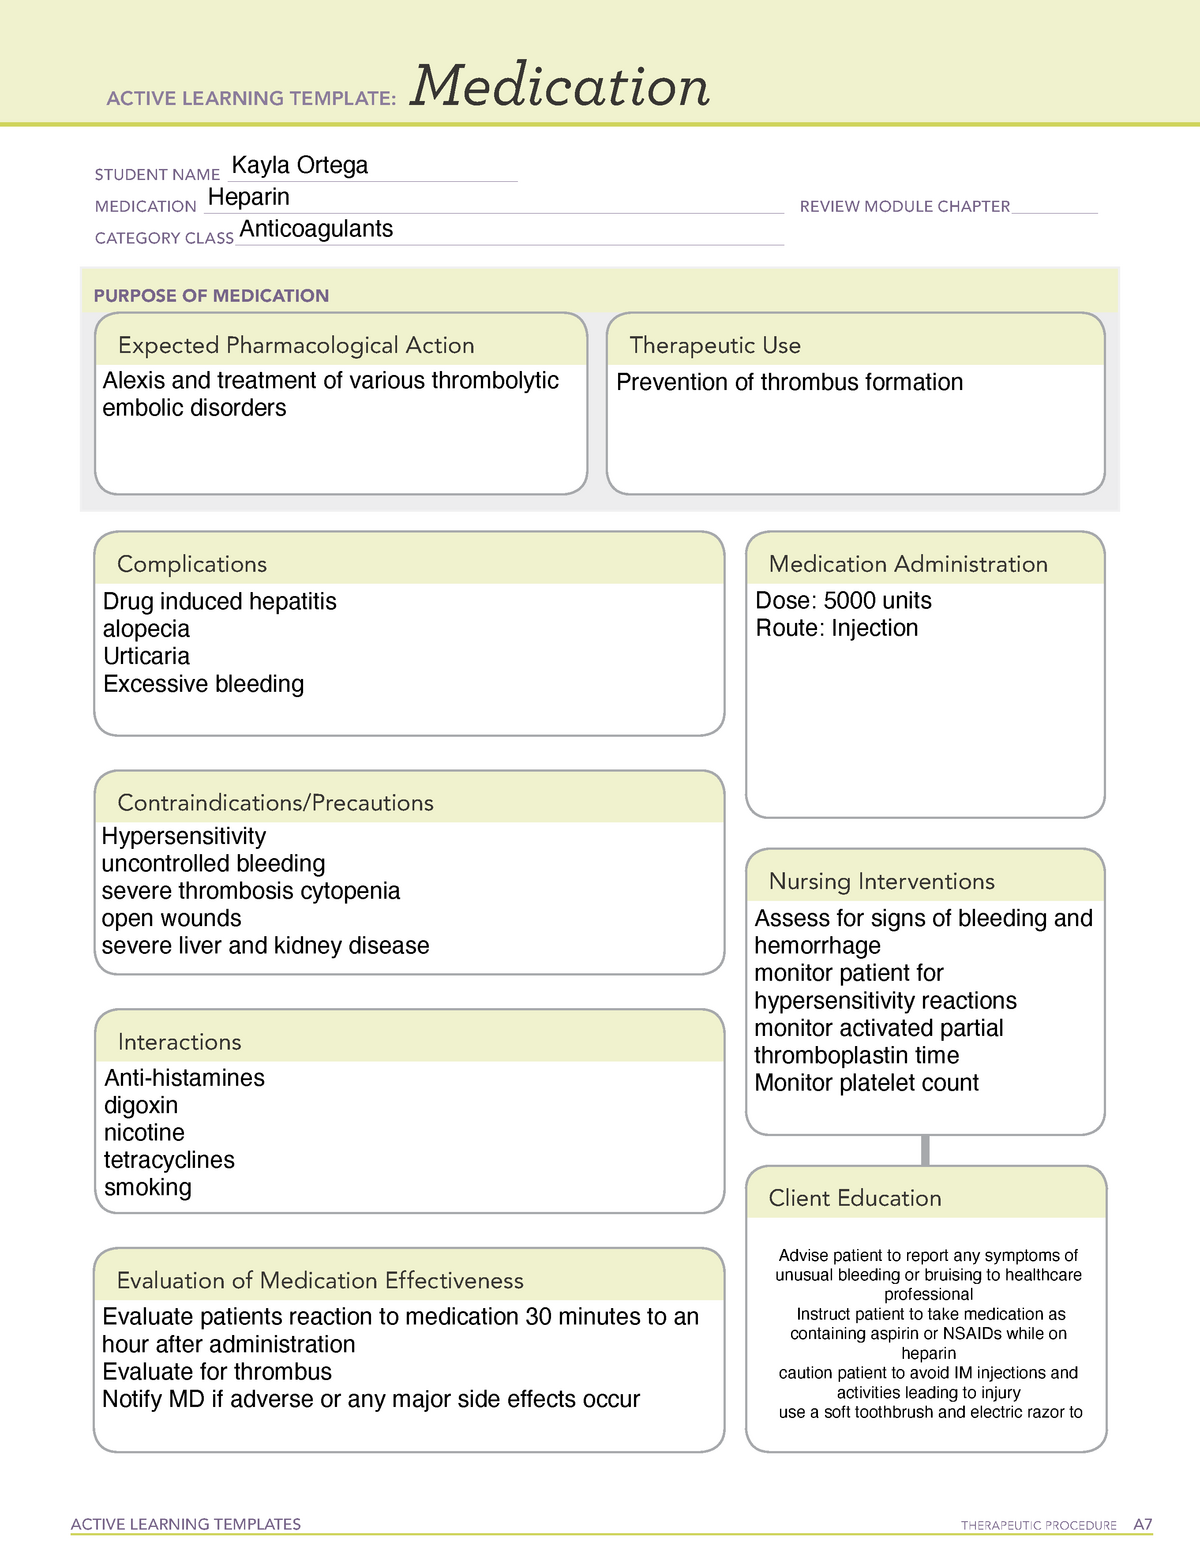 Heparin medication map ACTIVE LEARNING TEMPLATES THERAPEUTIC